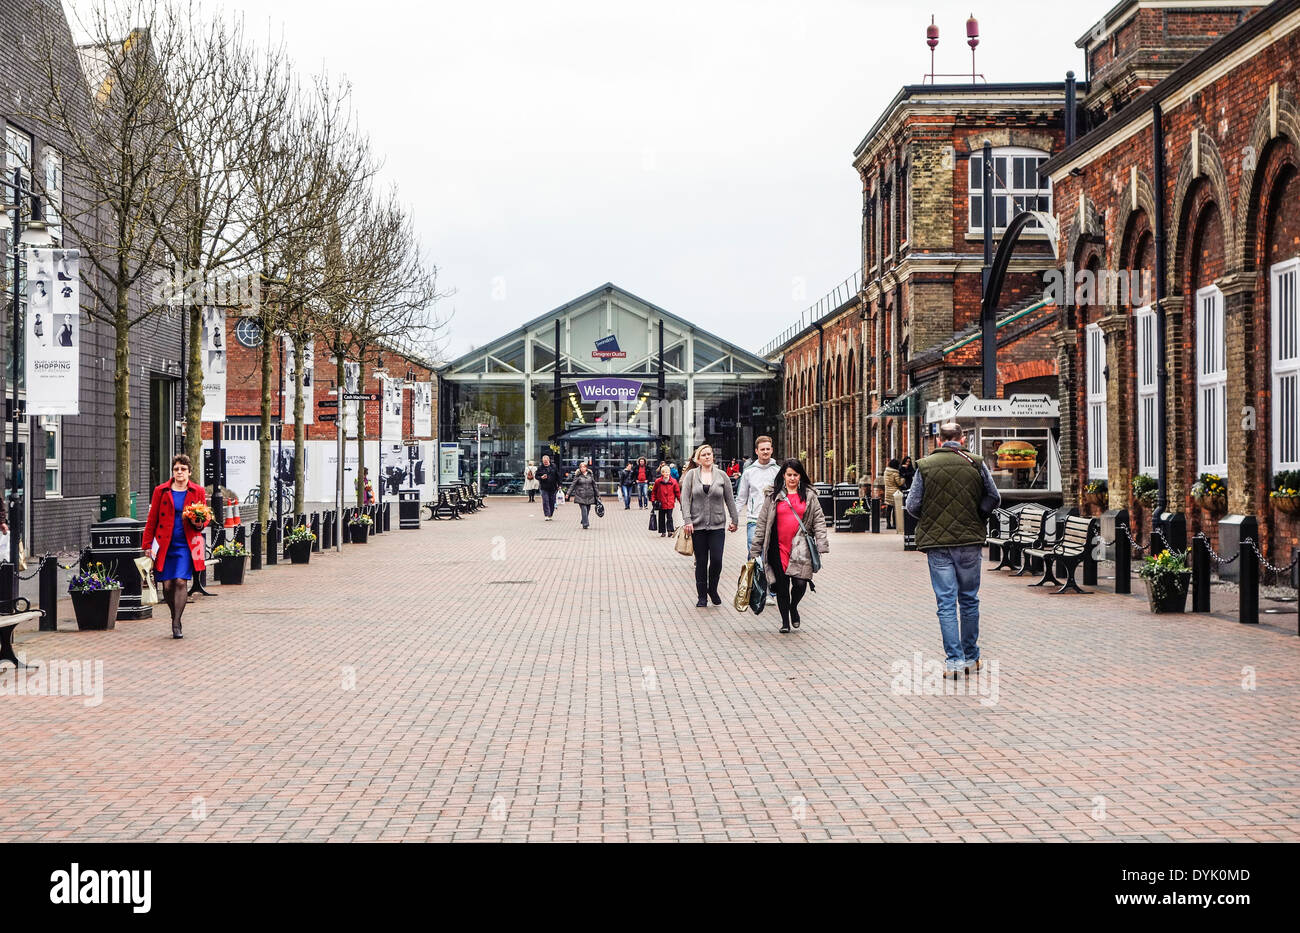 The Swindon Outlet shopping centre. UK. Stock Photo